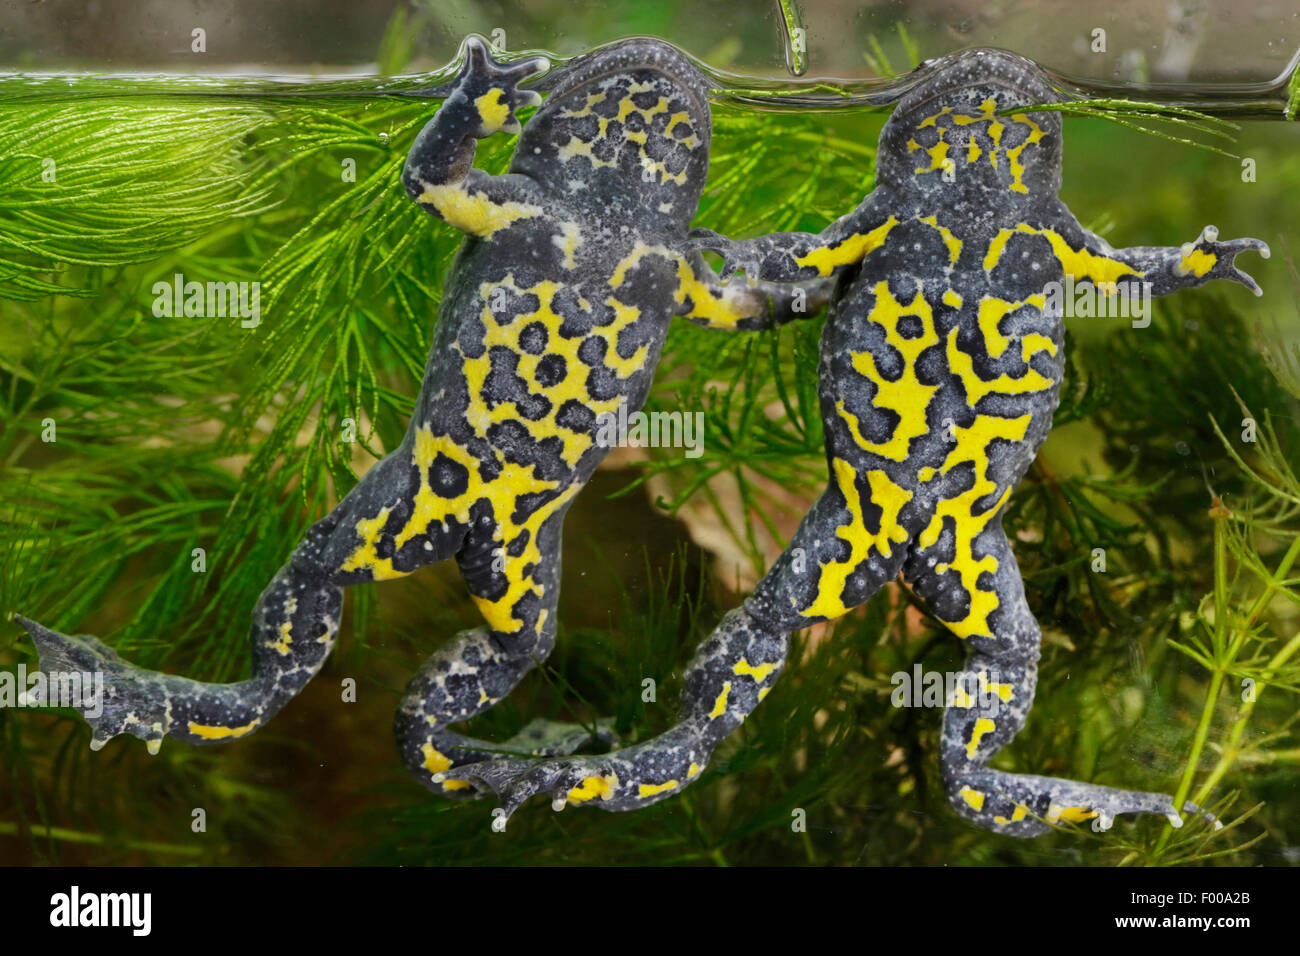 yellow-bellied toad, yellowbelly toad, variegated fire-toad (Bombina variegata), colors of the belly of two yellowbelly toads, Germany, Bavaria Stock Photo